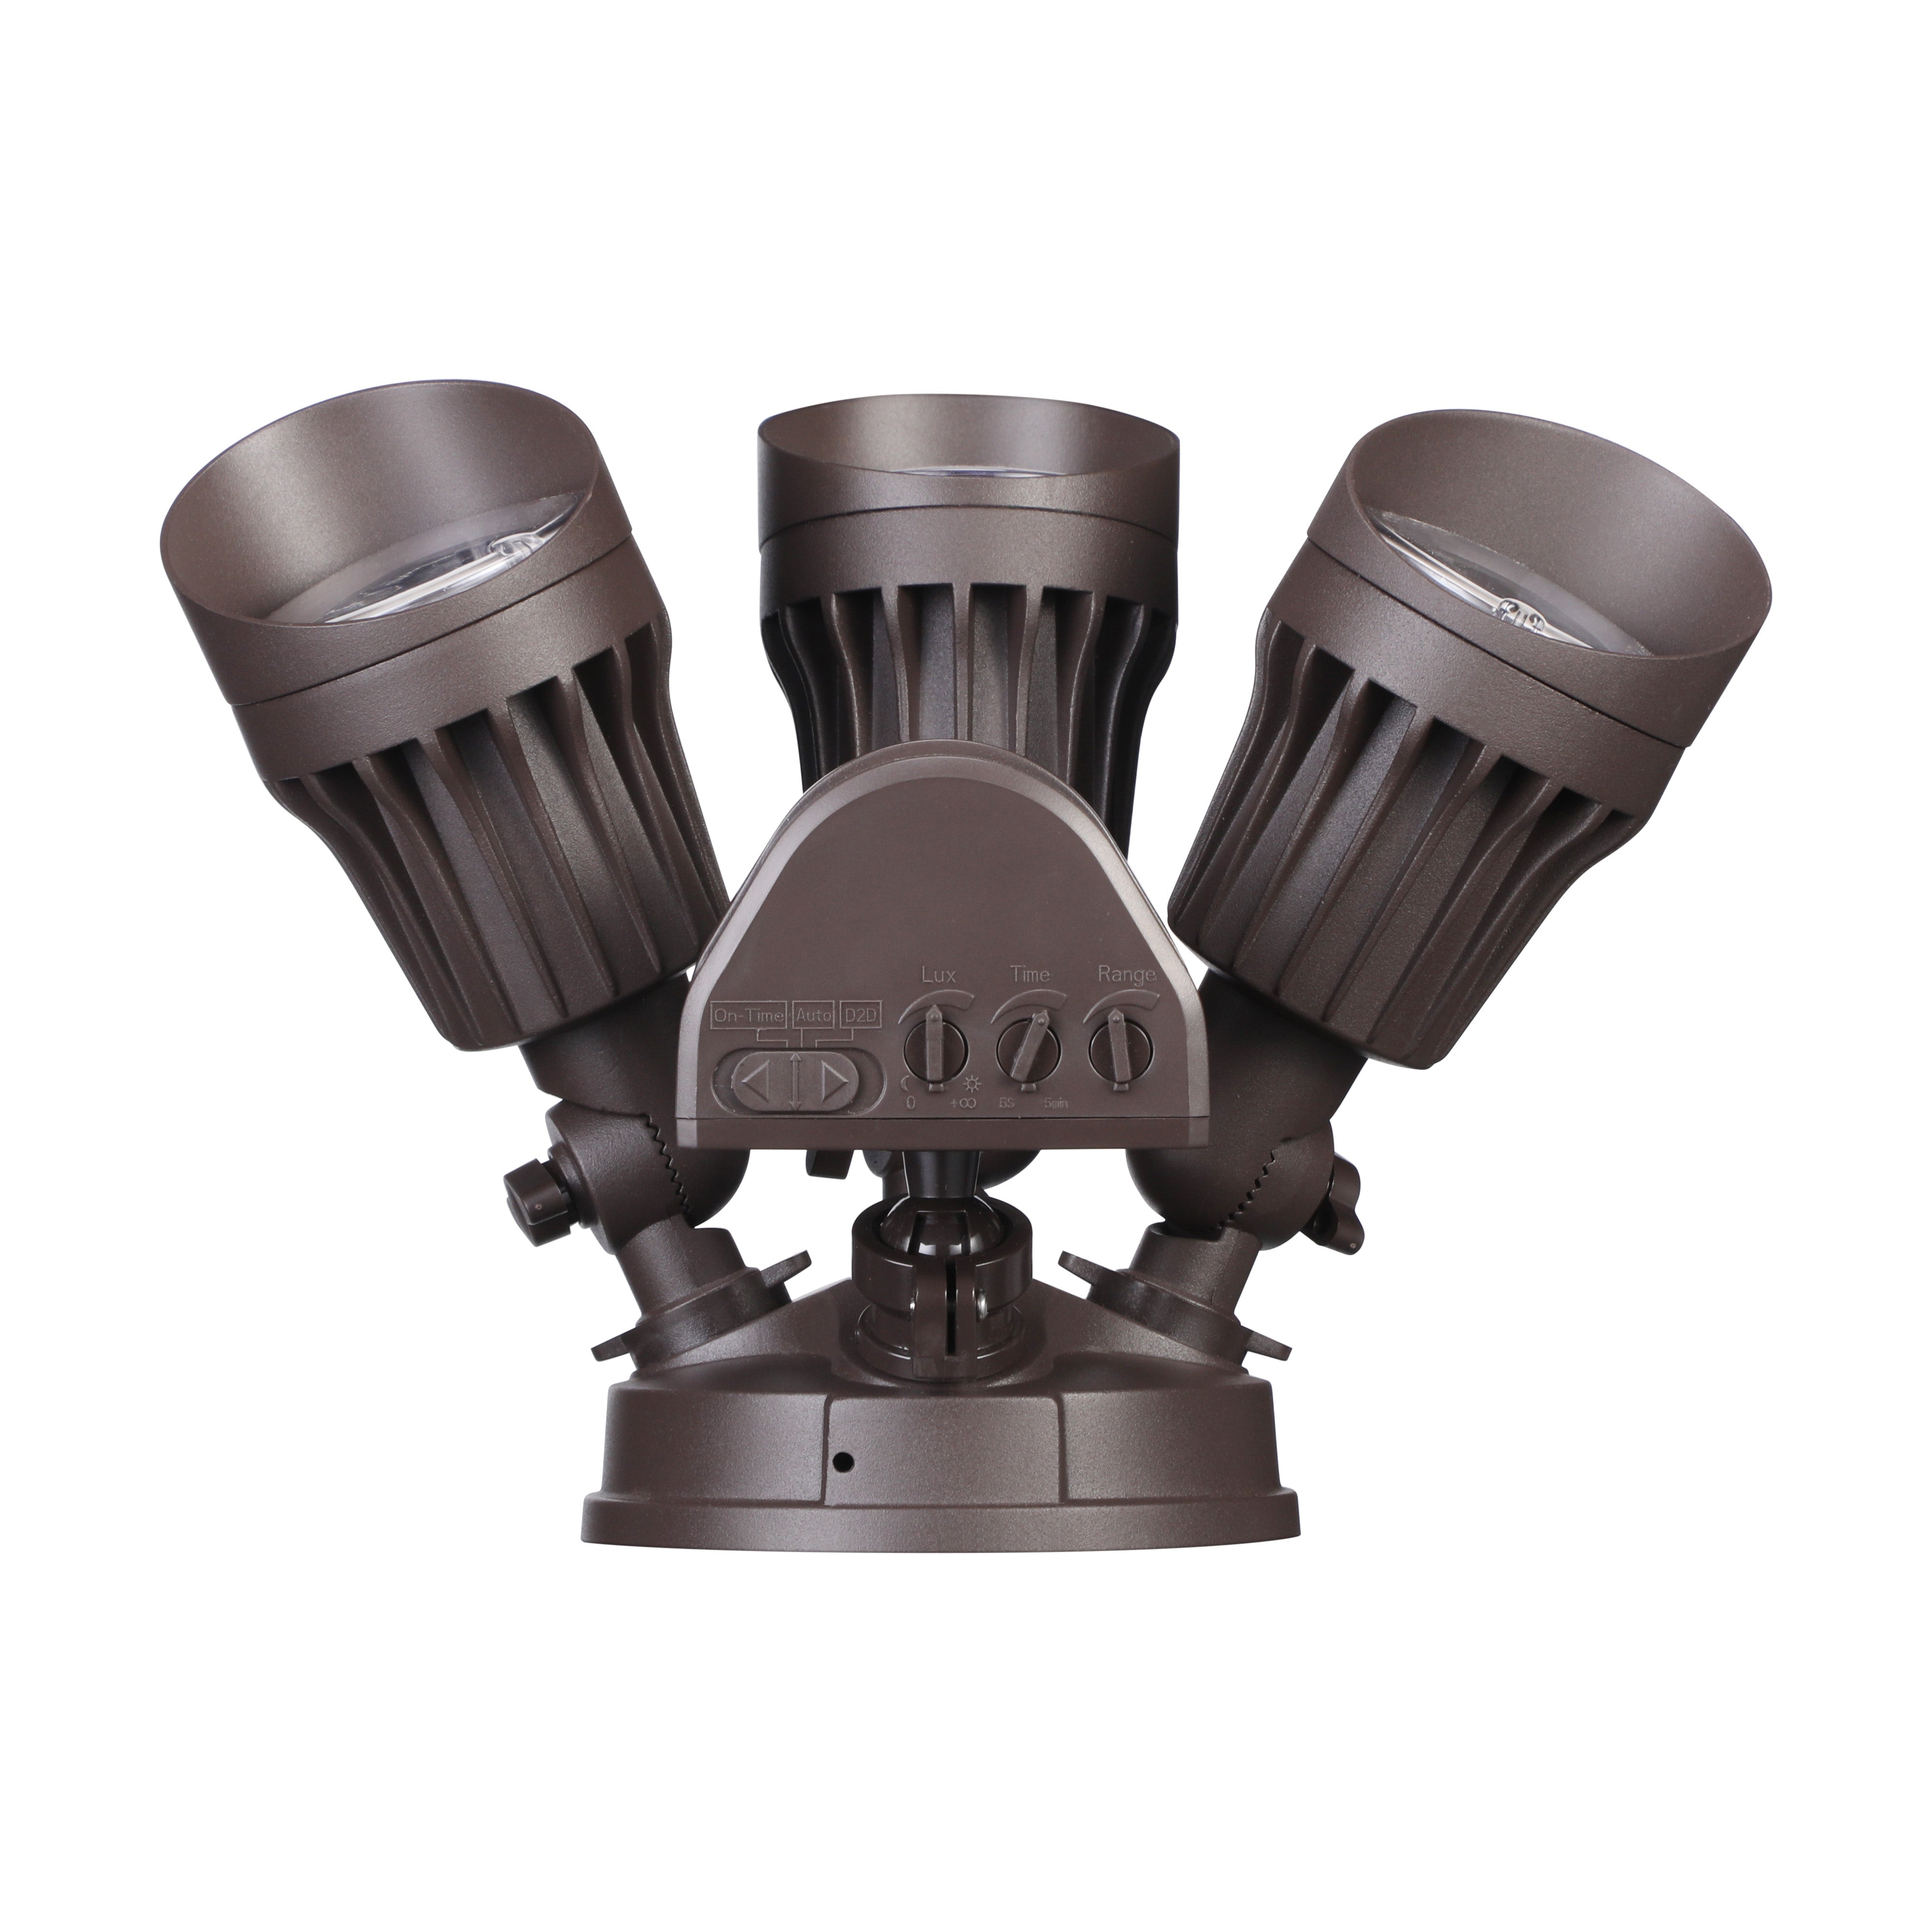 Watchman+ Tri-Heads 37.5W LED Security Light - Brown - Adjustable CCT